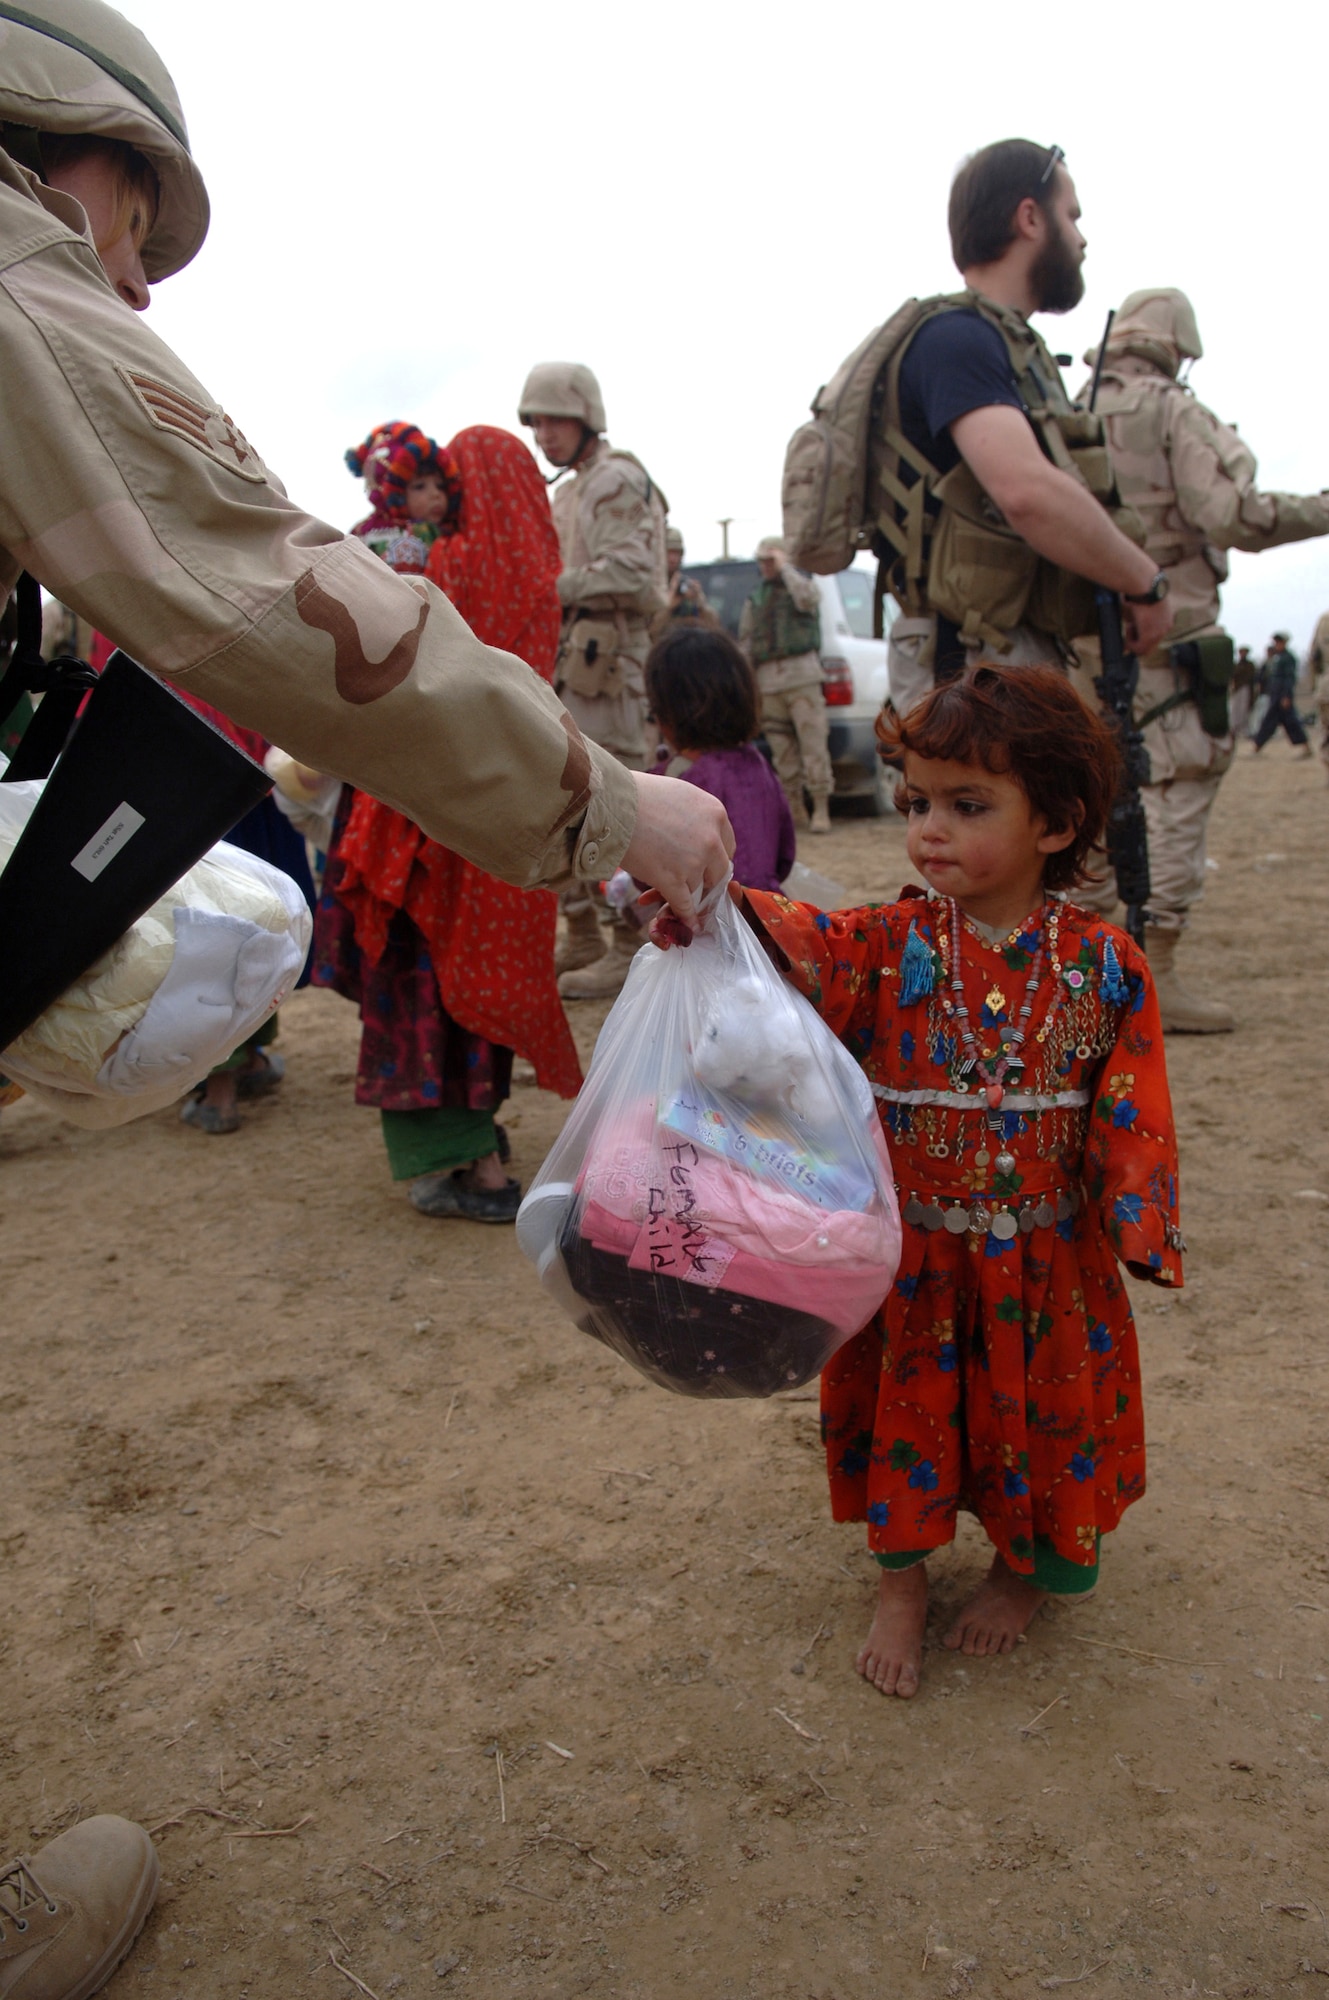 Senior Airman Jennifer Travise hands a young girl from Gadia, Afghanistan, a bag of basic necessities during a recent Adopt-A-Village visit. Airman Travise is an ammunitions accountability clerk with the 455th Expeditionary Aircraft Maintenance Squadron at Bagram Air Base, Afghanistan. She is deployed from Eielson Air Force Base, Alaska. (U.S. Air Force photo/Staff Sgt. Jennifer Redente) 